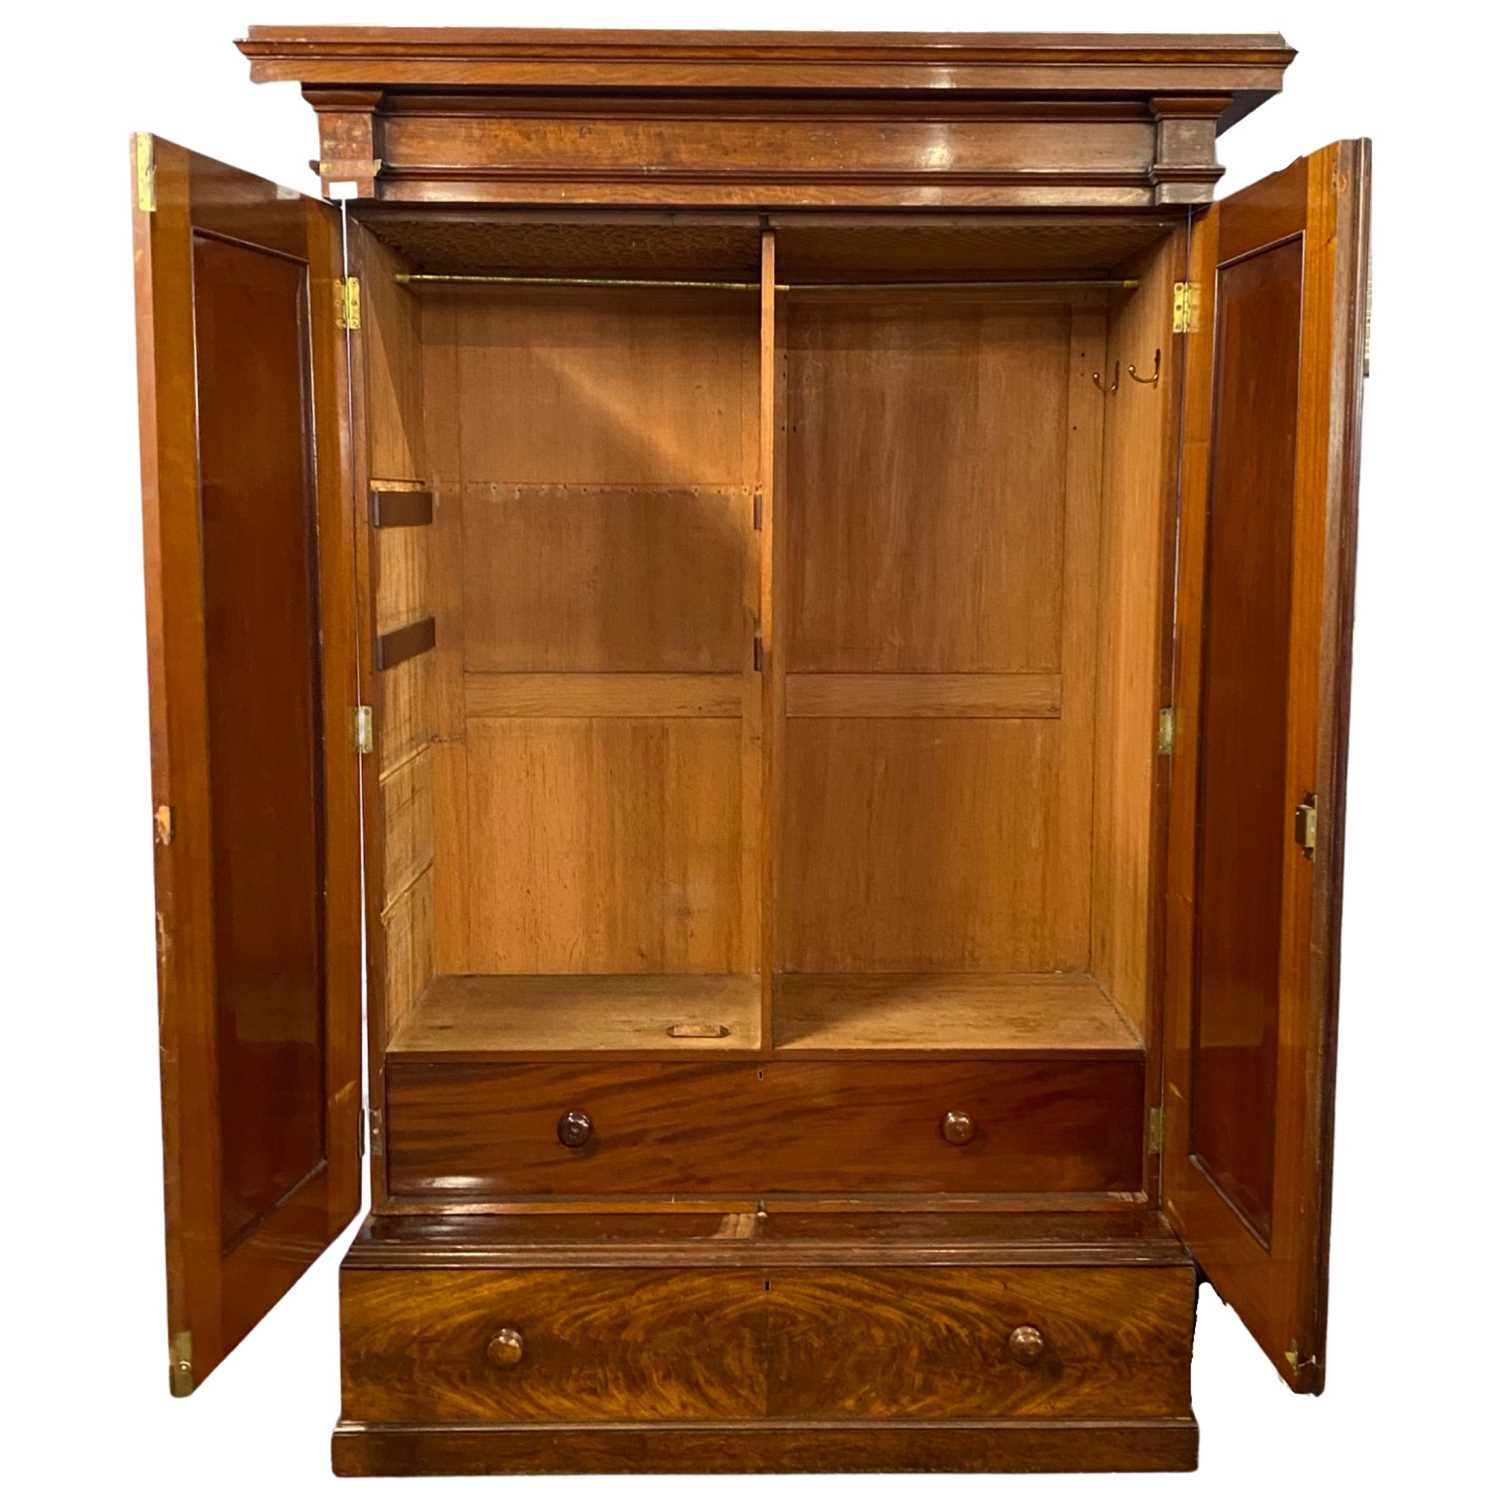 A large Victorian mahogany wardrobe with architectural cornice over two panelled doors and a base, - Image 2 of 2